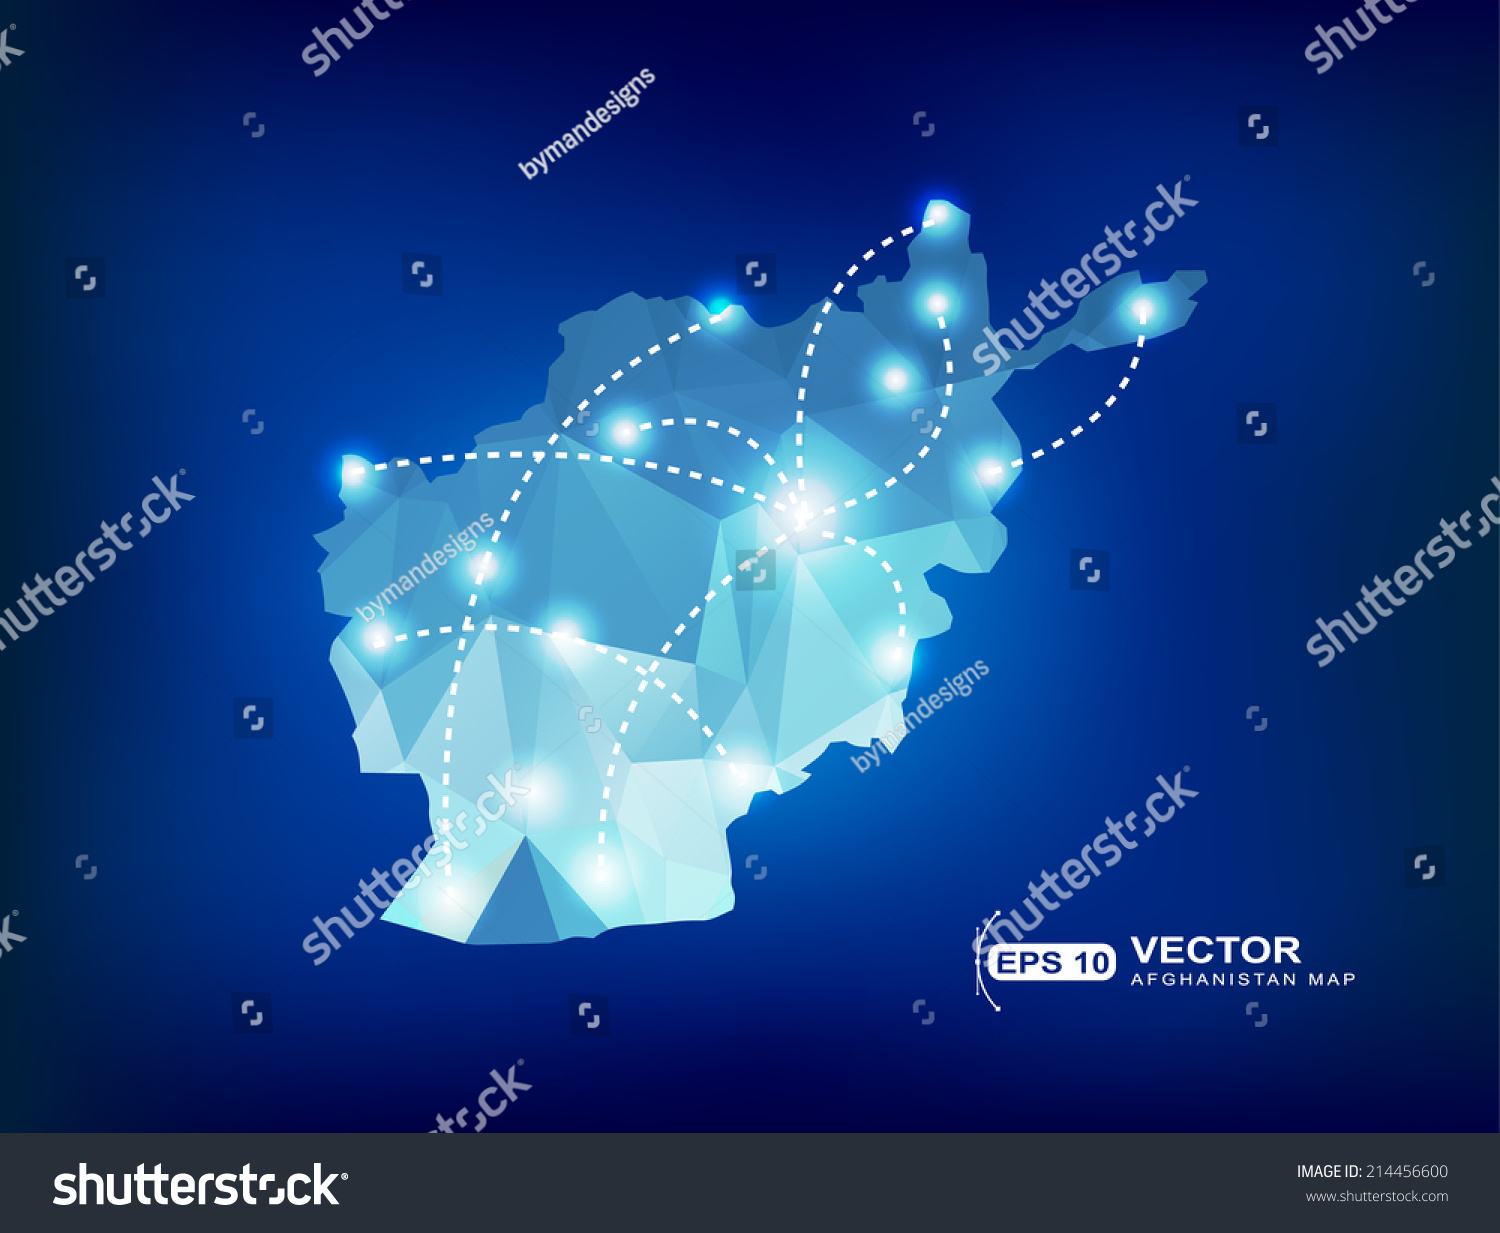 Afghanistan country map polygonal with spot lights places #214456600